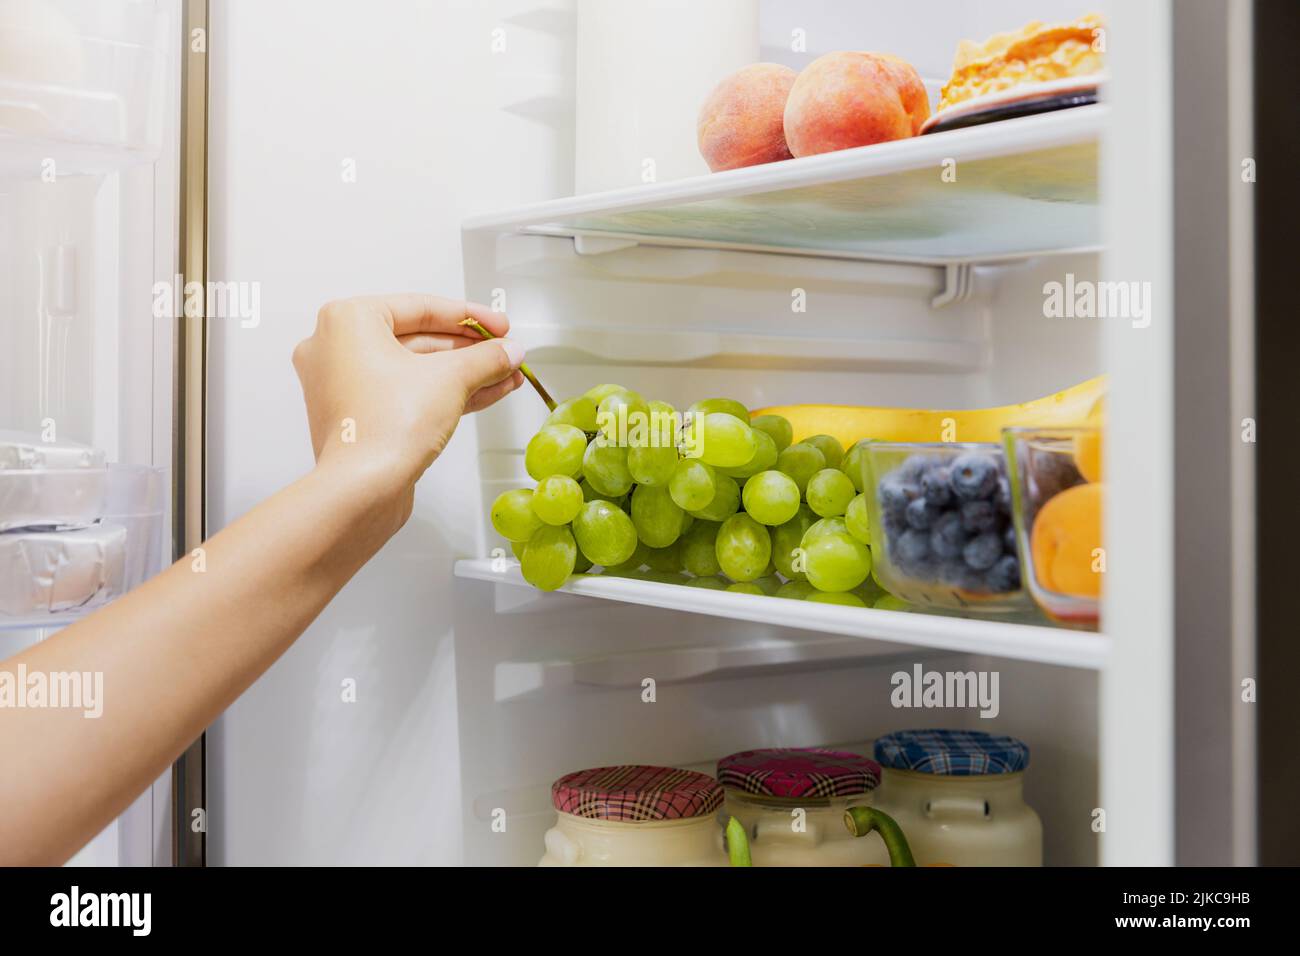 Woman hand taking, grabbing or picks up green bunch of grapes out of open refrigerator shelf or fridge drawer full of fruits, blueberries, bottles with yogurt. Healthy food diet, lifestyle concept Stock Photo